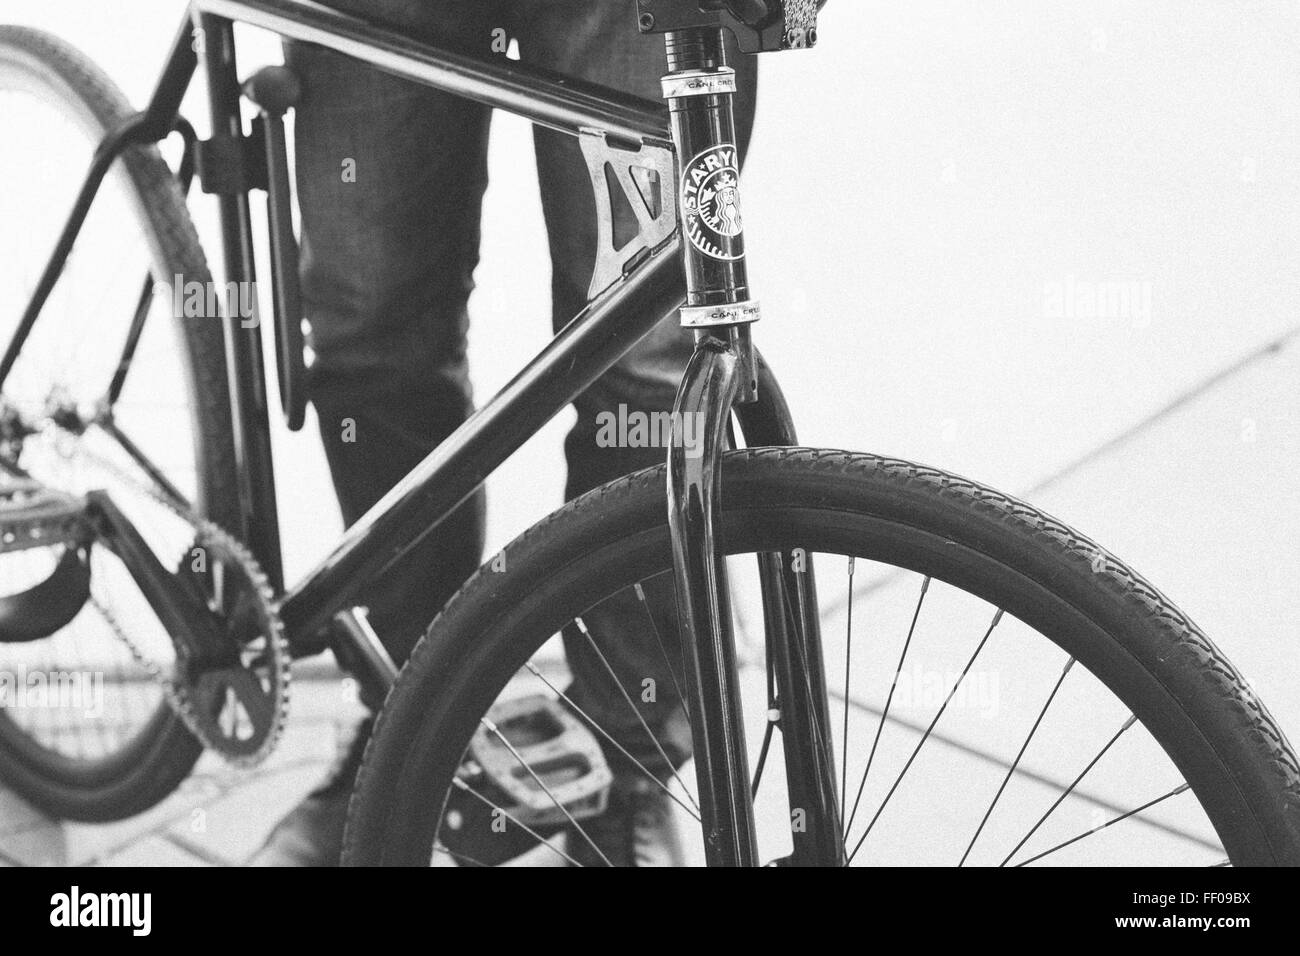 Black and White Photo of Bicycle Black and White Photo of Bicycle Stock Photo